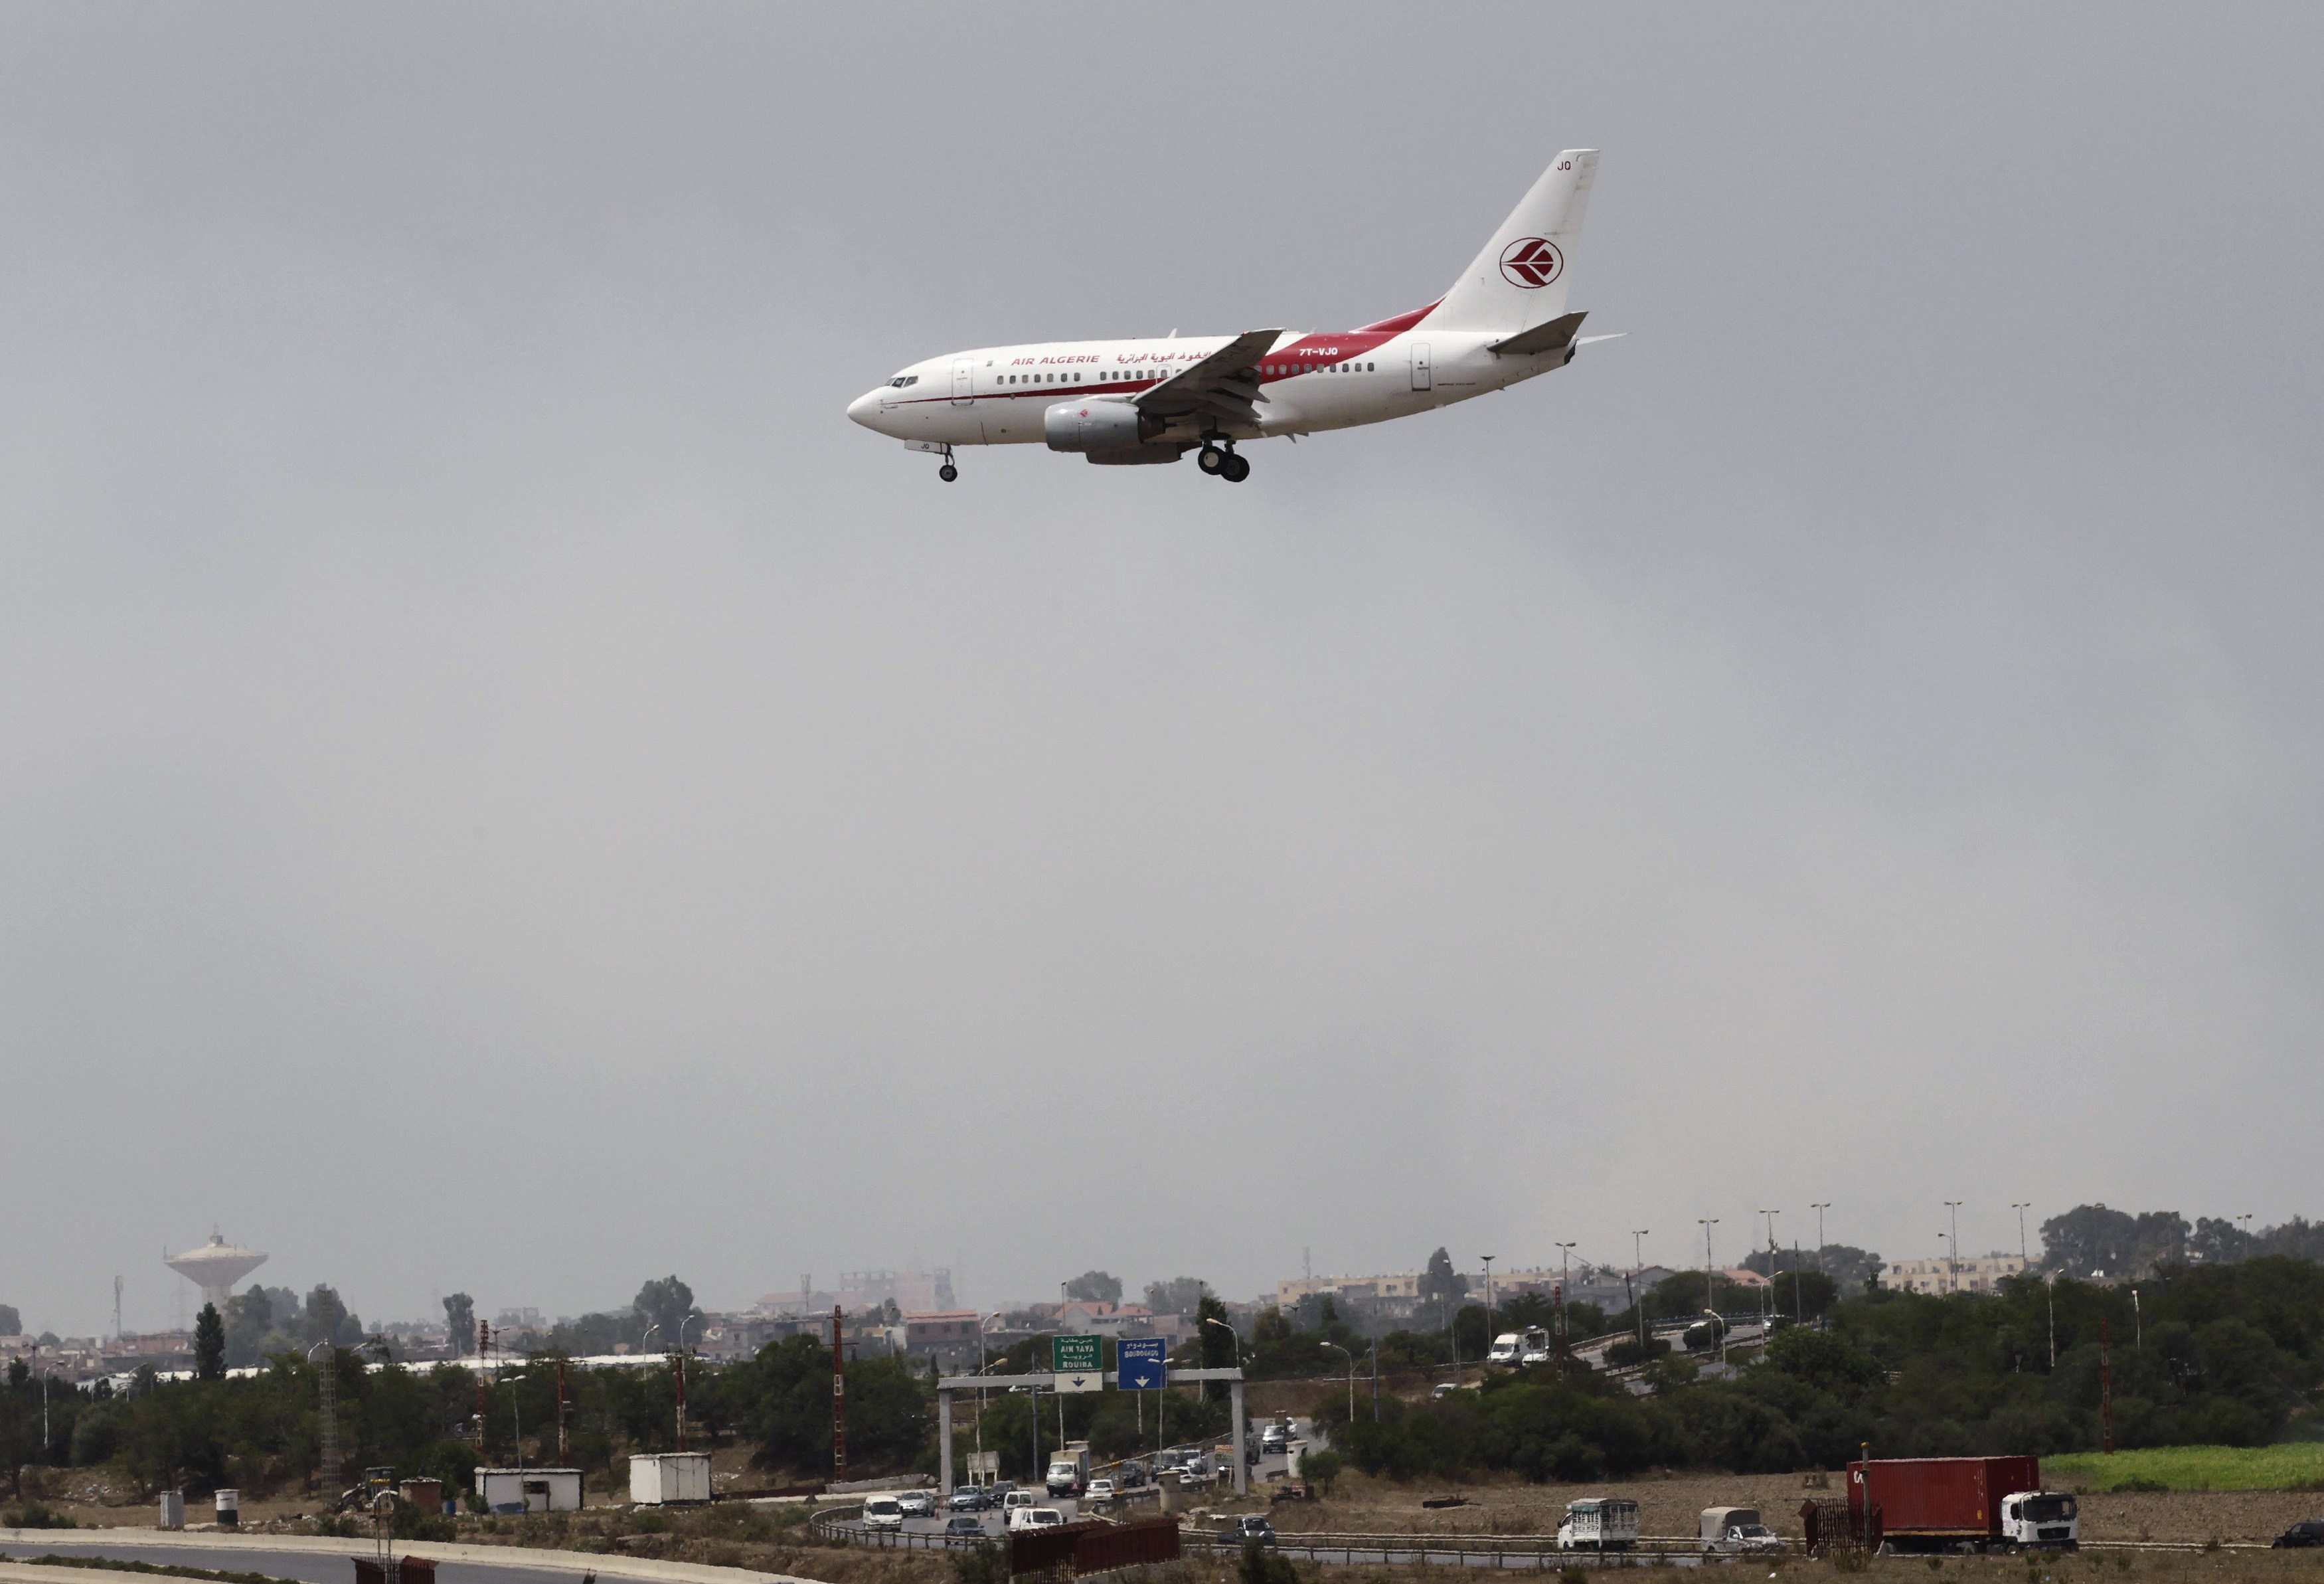 French Officials: Bad Weather Likely Cause of Fatal Air Algerie Crash